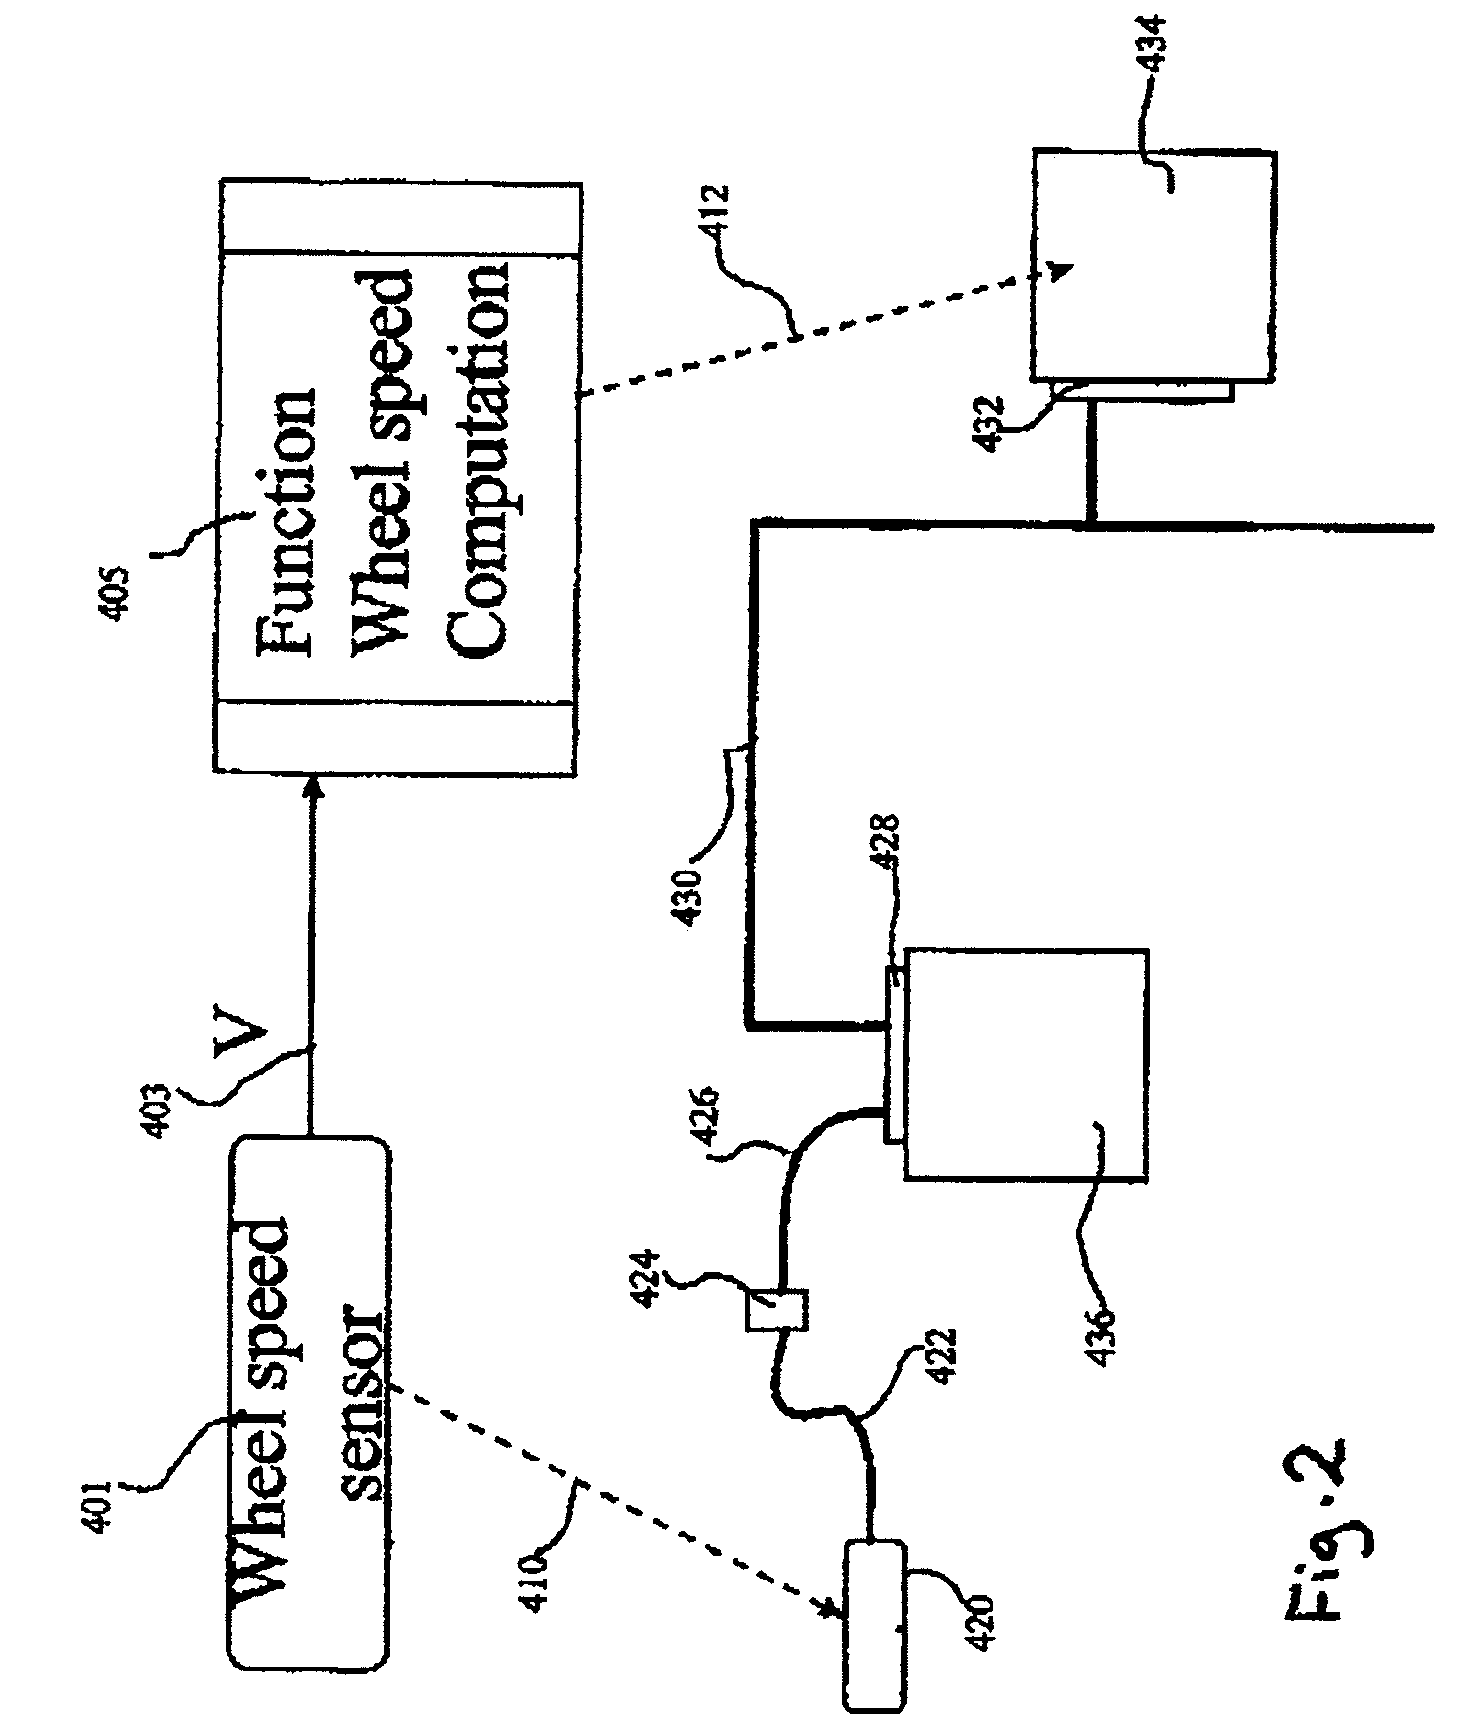 Method for design and verification of safety critical systems